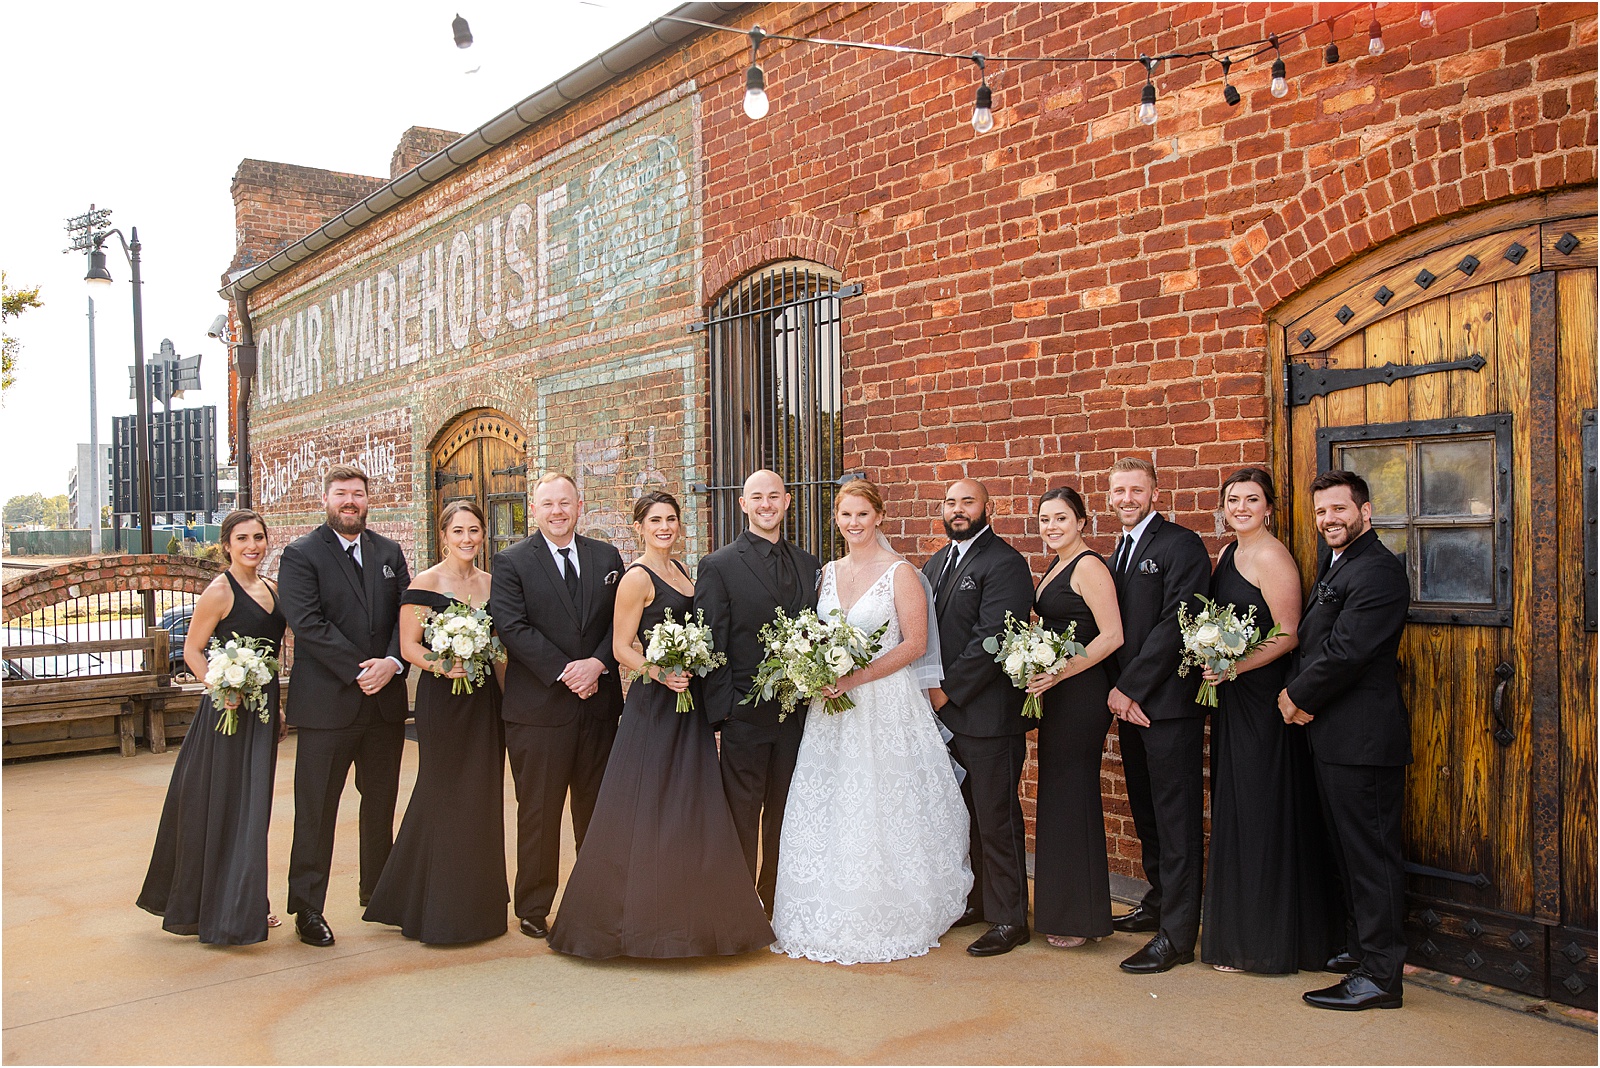 full bridal party in black suits pose with bride and groom